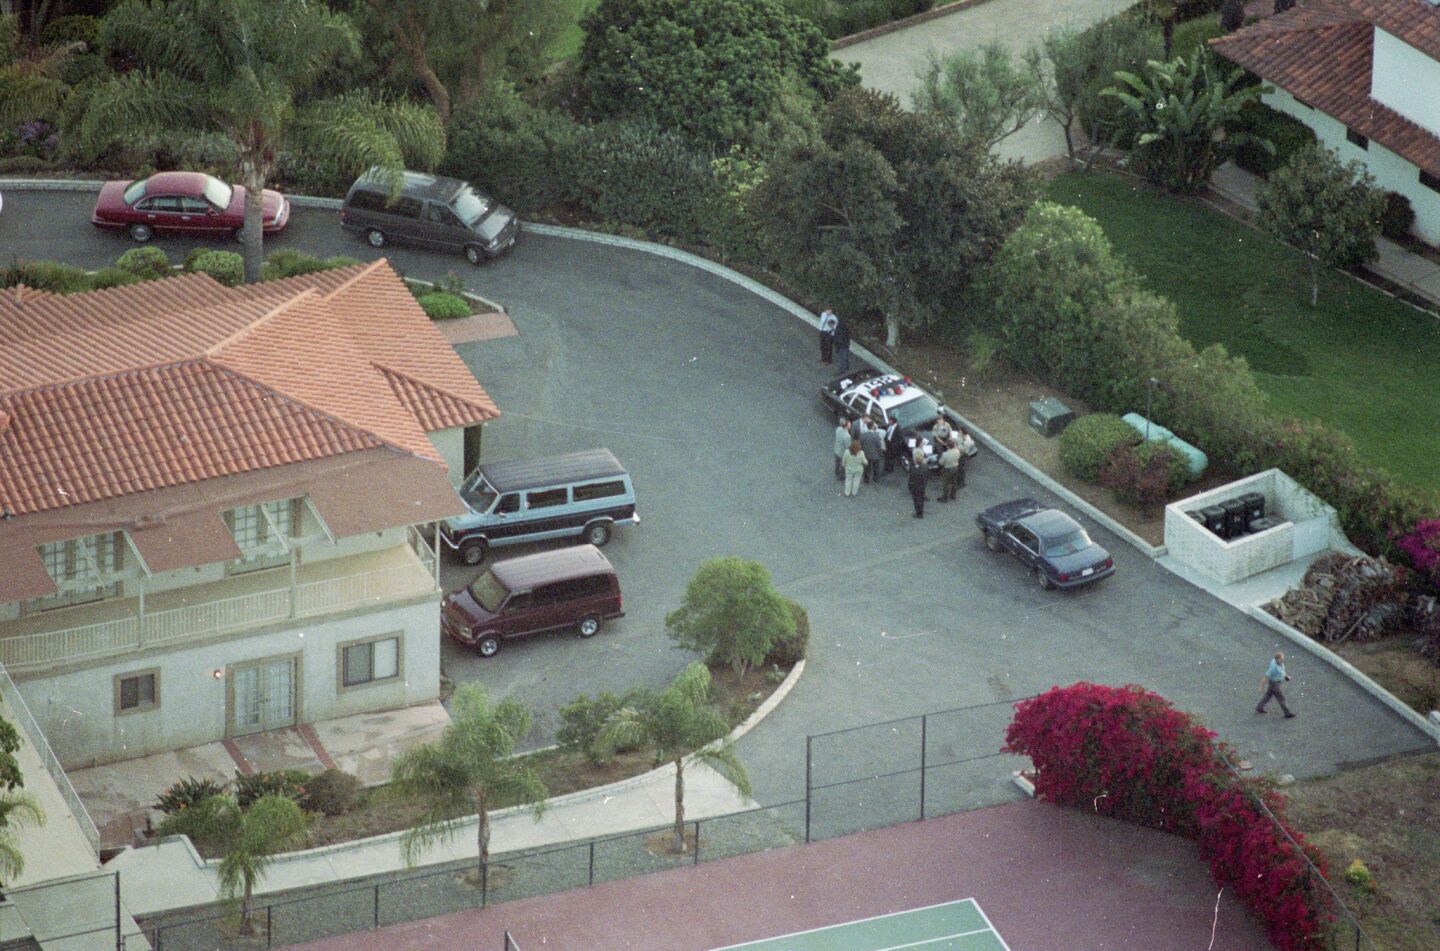 Investigators gather outside the Rancho Santa Fe mansion 39 bodies of Heaven's Gate members were found on March 26, 1997. They died in a mass suicide.